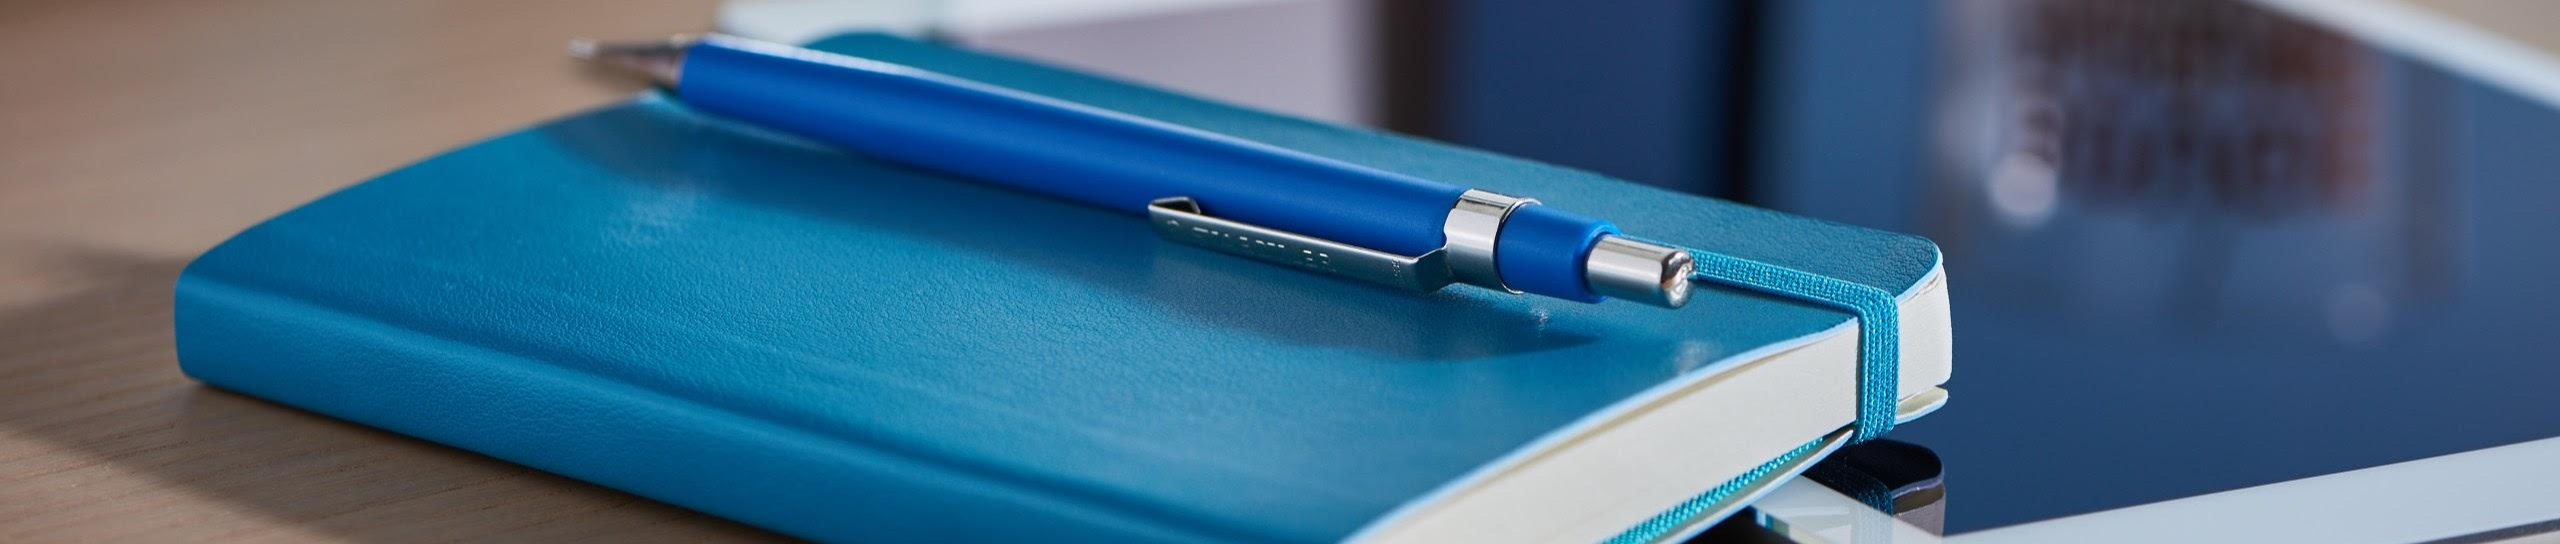  Blue notebook, pen and tablet on a table